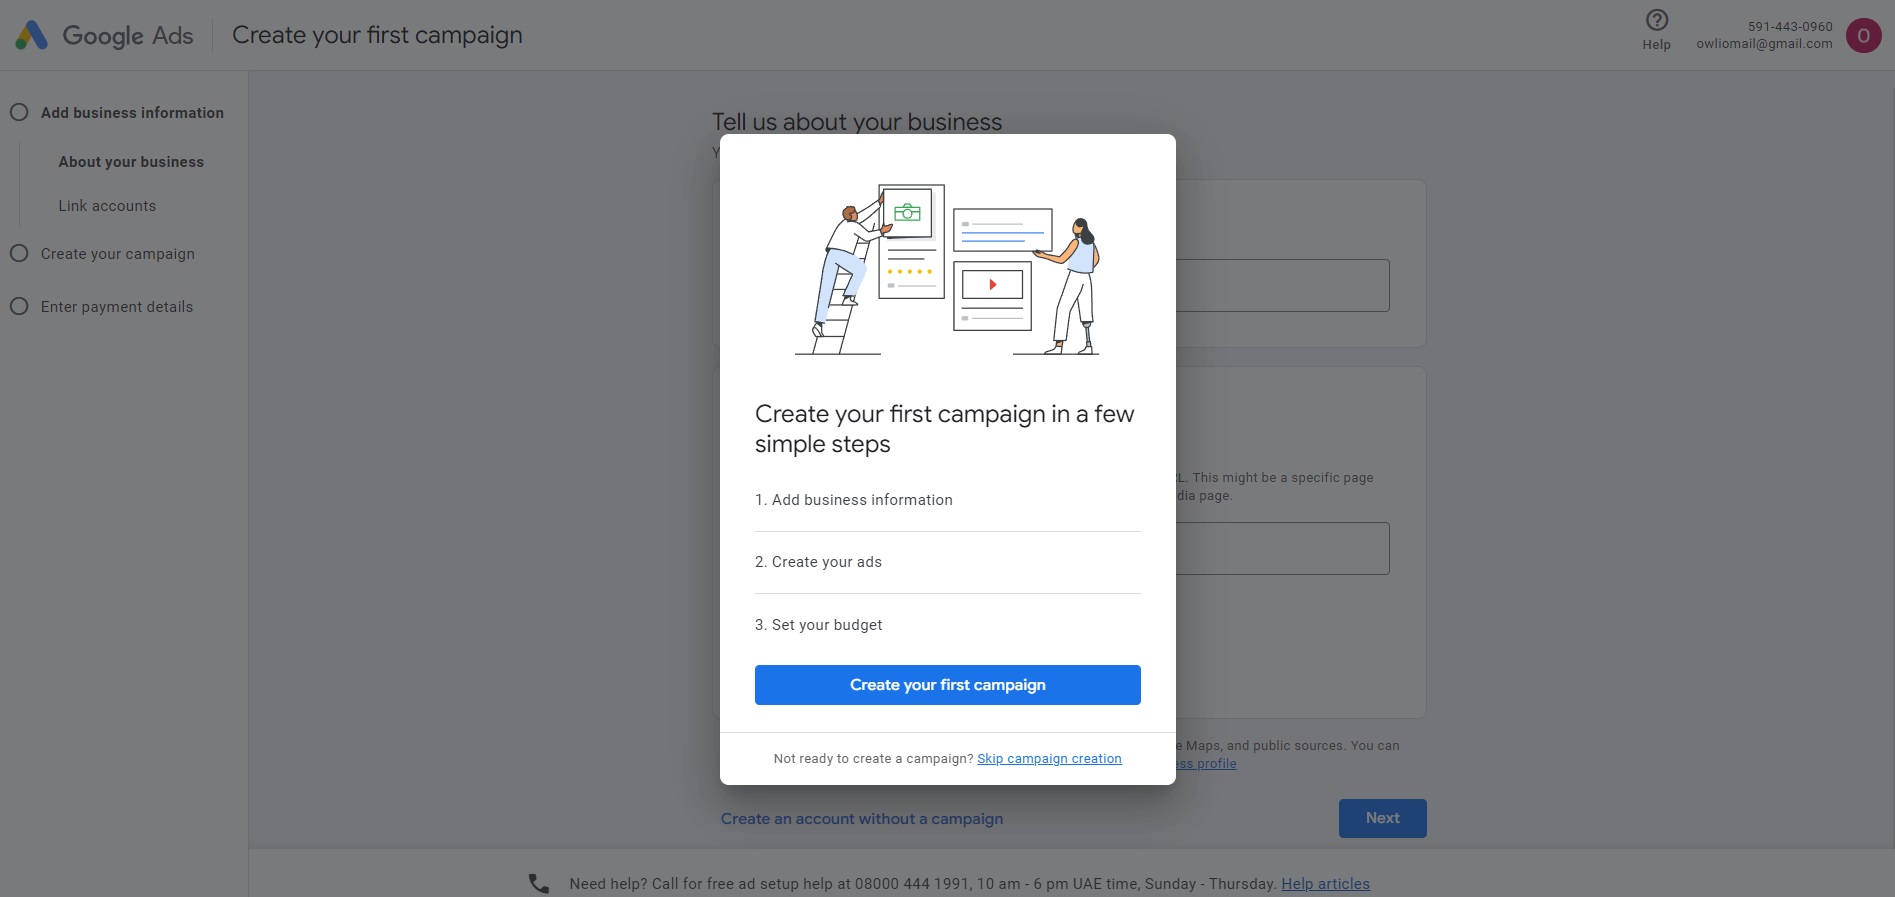 Screenshot of Google Ads Sign-Up Page